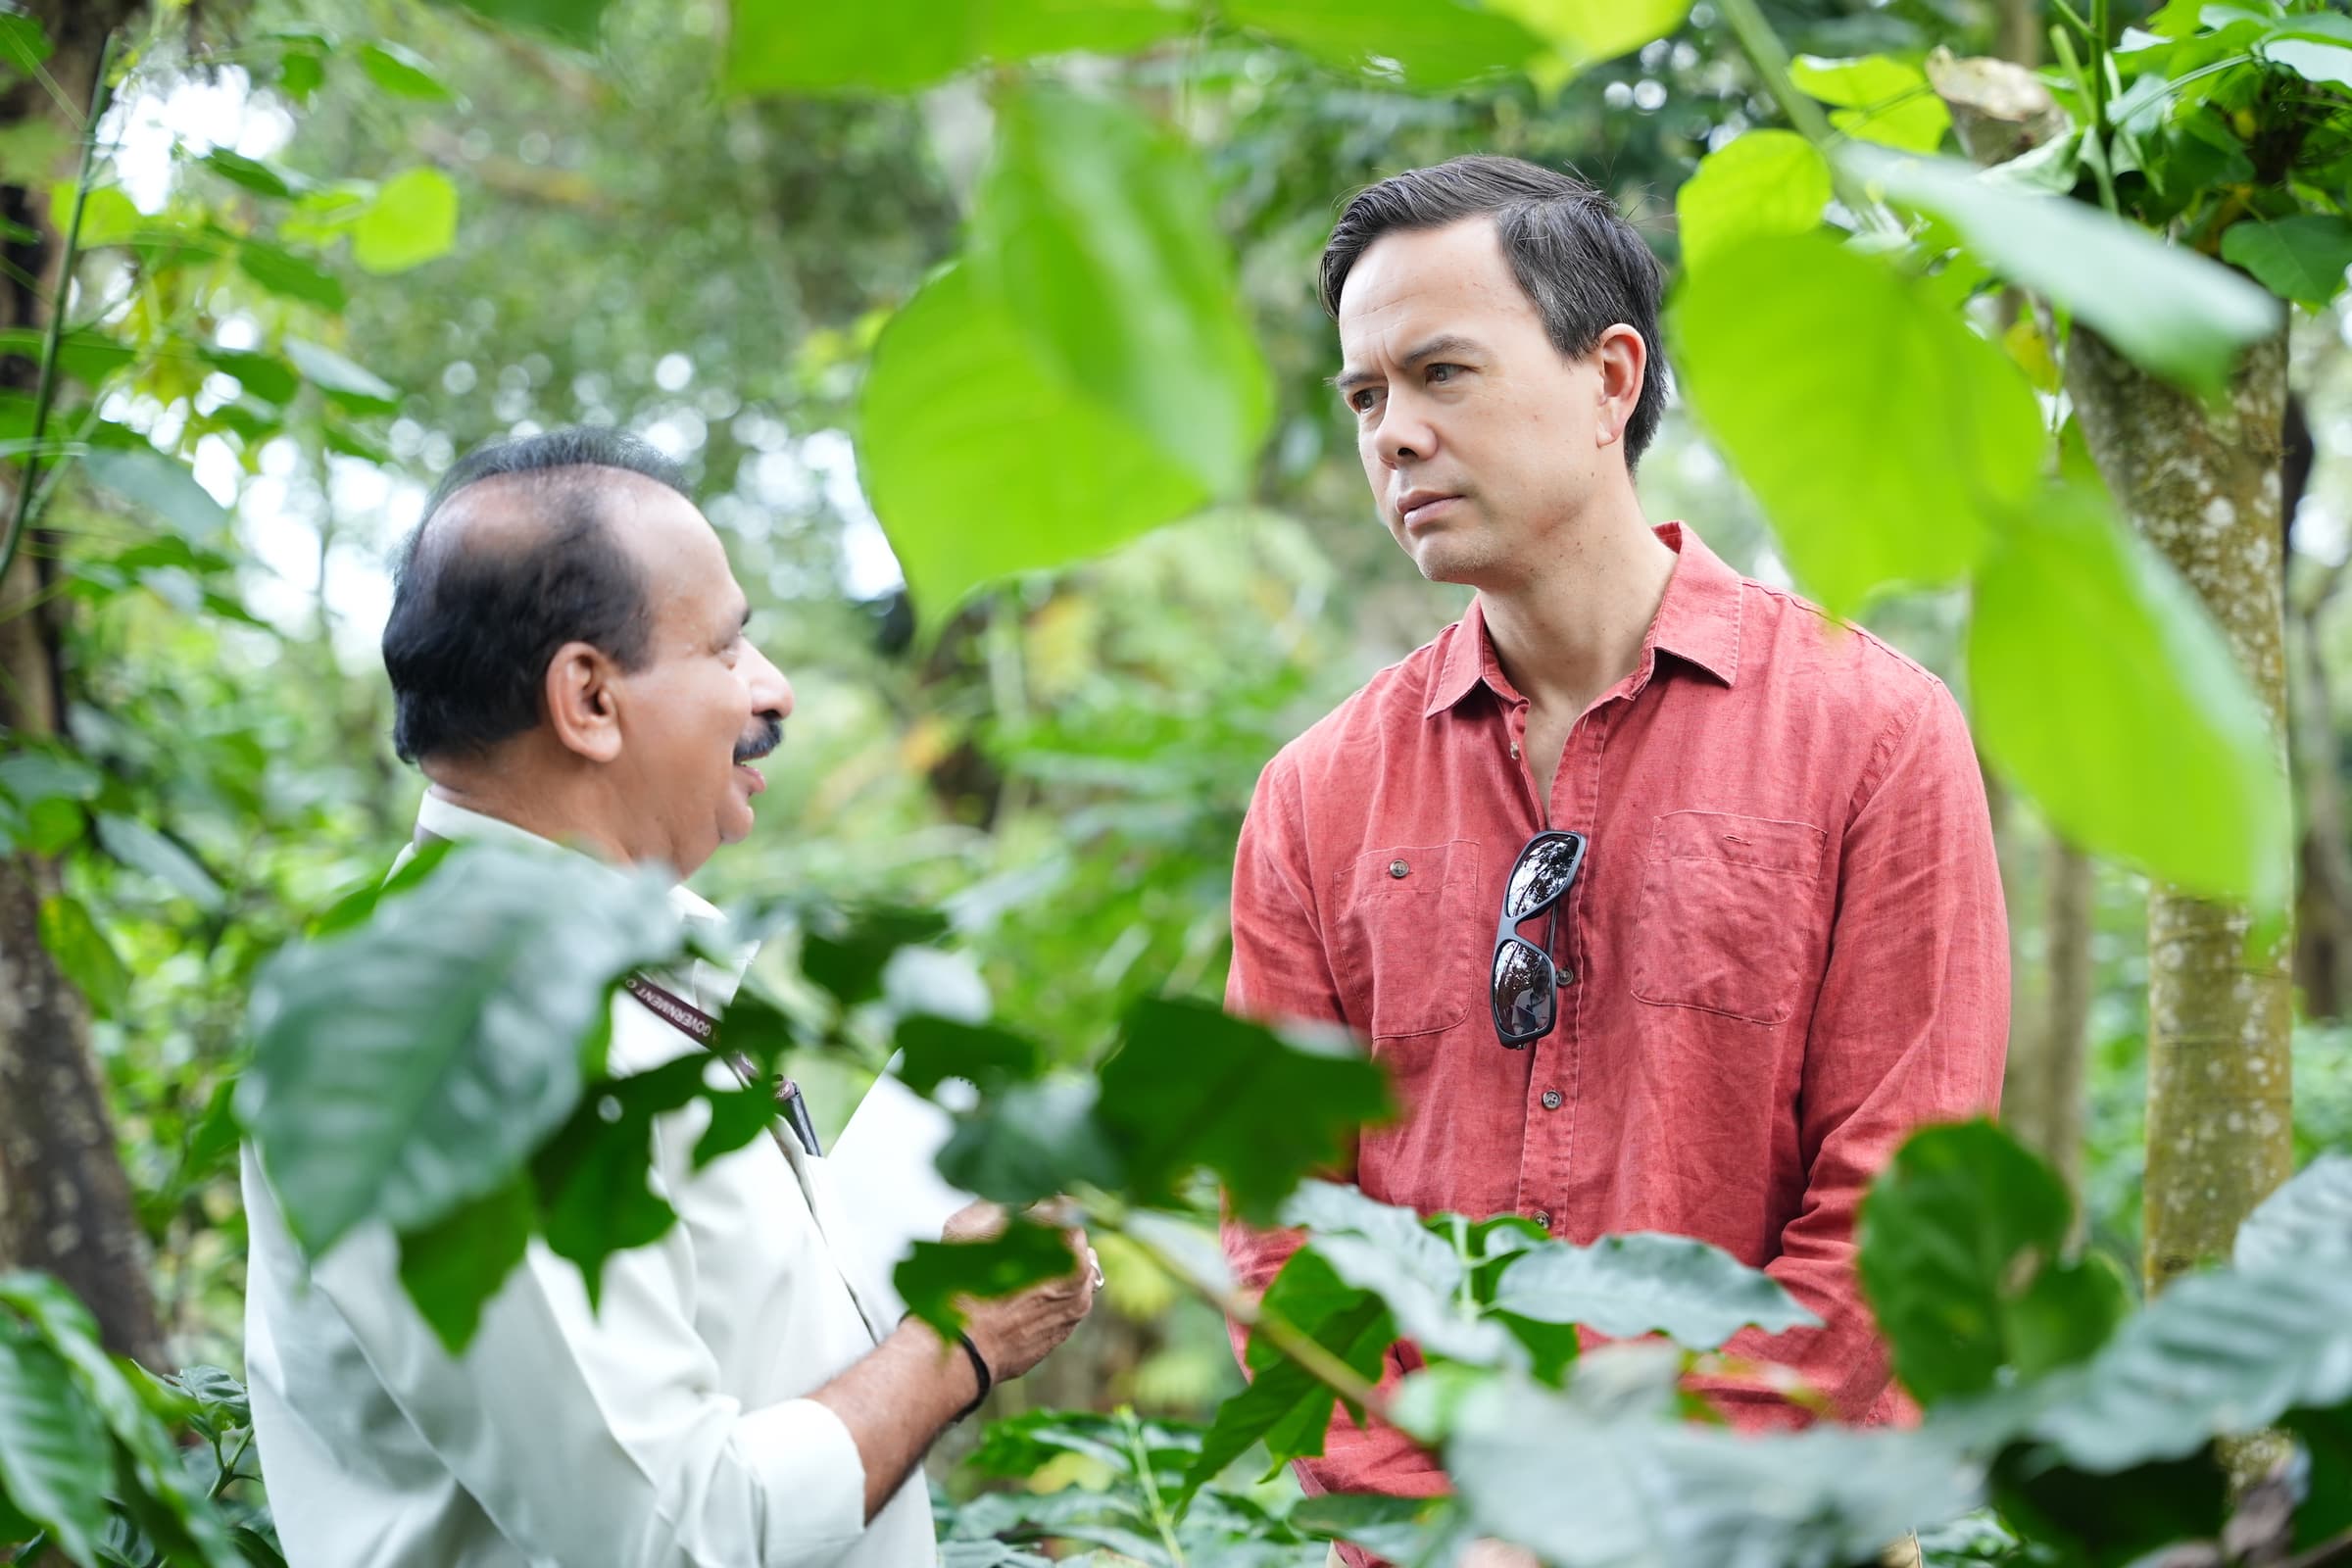 Dr. HG Seetharama, head of the Entomology Division at CCRI and Dr. Kraig Kraft of WCR, discuss disease pressures in Indian production systems.